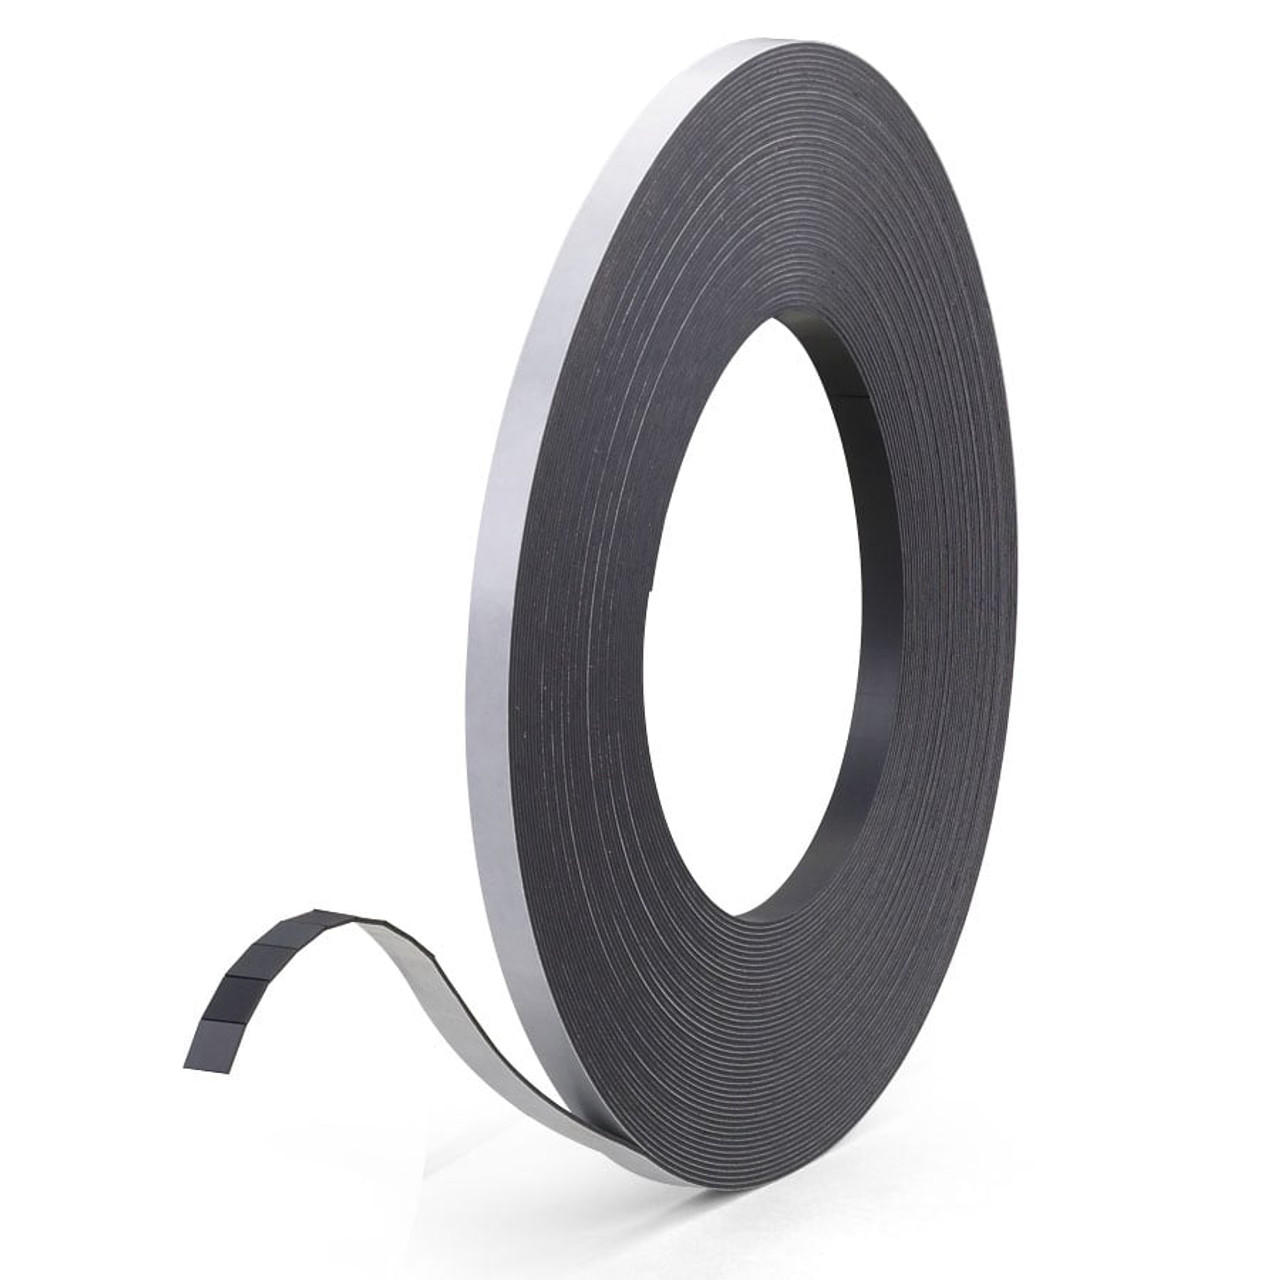 Duraco Magnetic Tape Pieces/Roll Indoor - Duraco